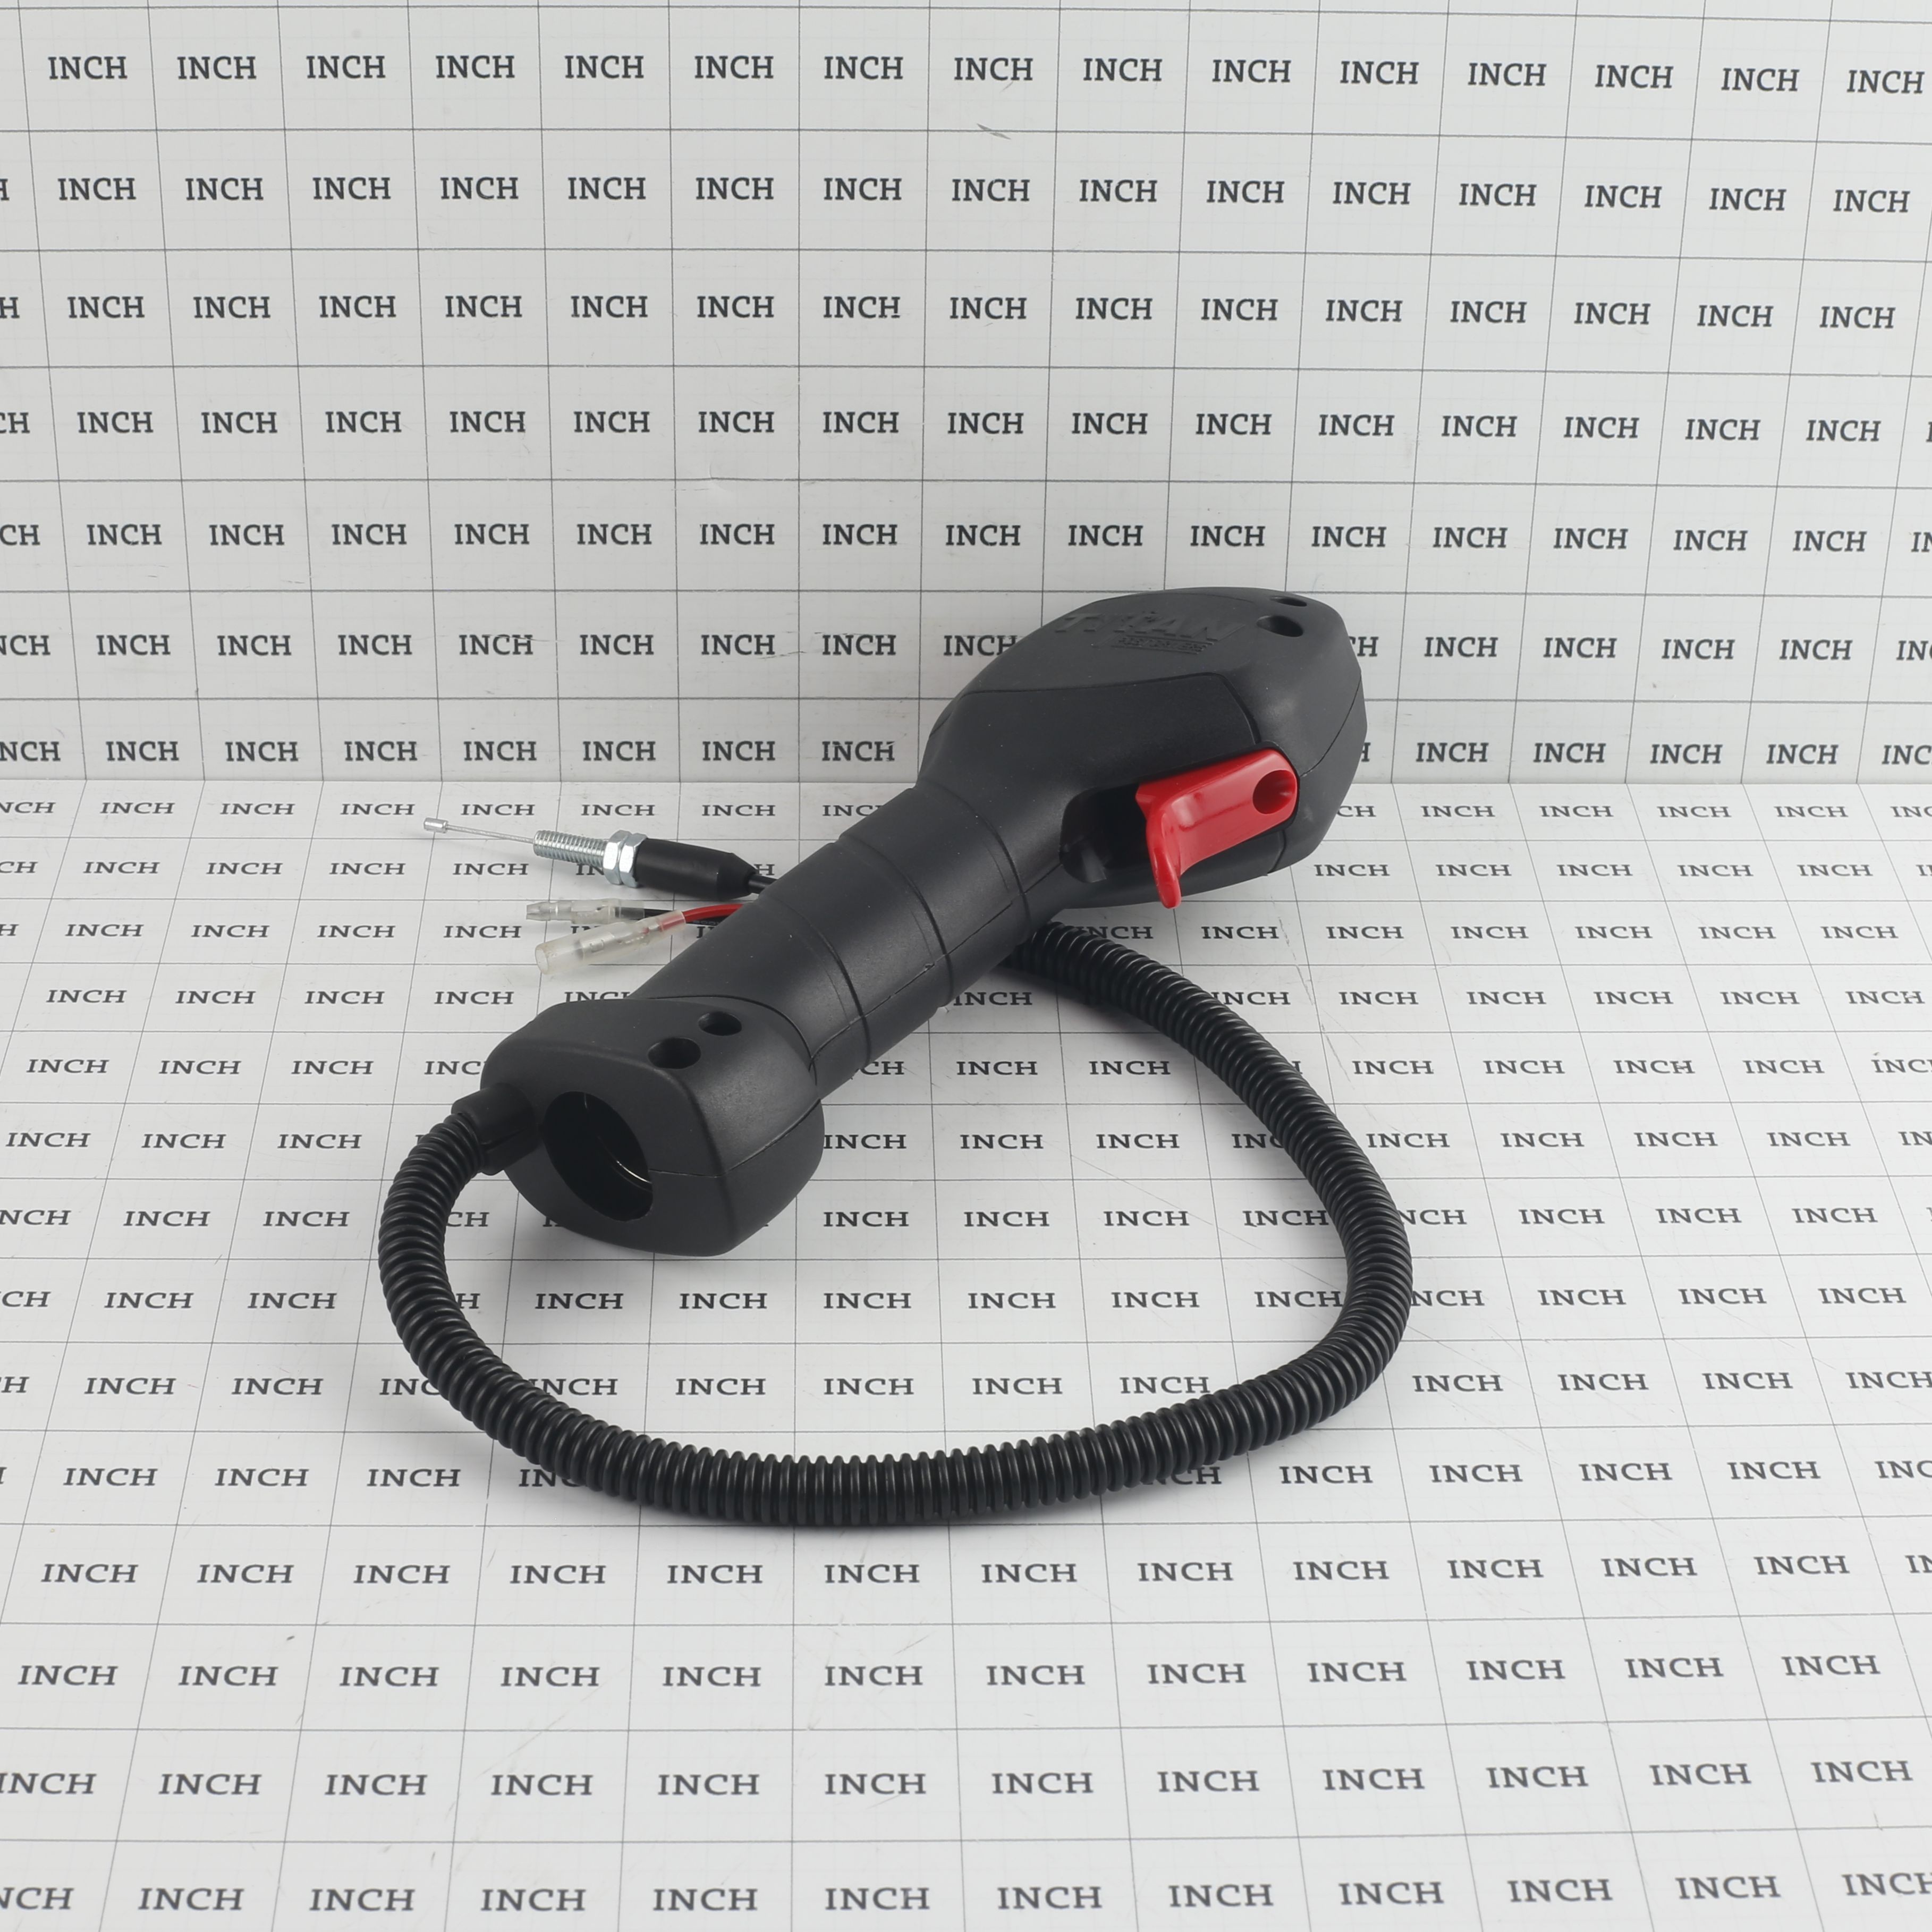 Titan Post Drivers Throttle Switch - Contractor Series Drivers 